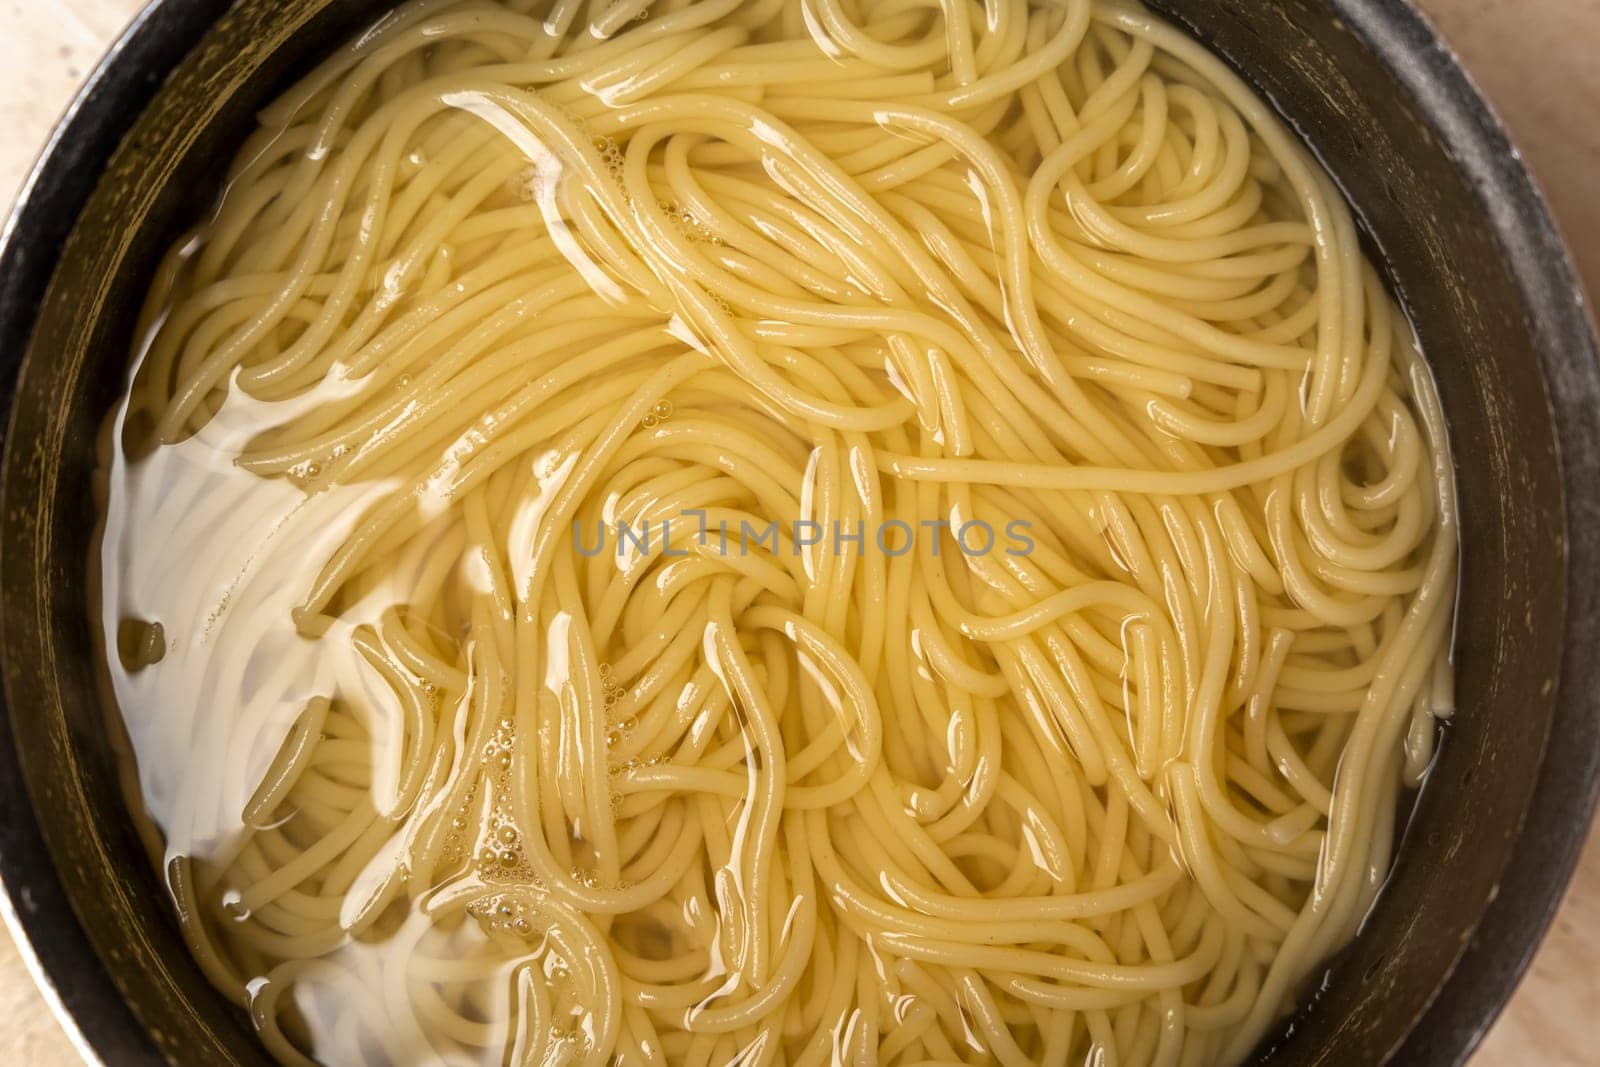 boiled spaghetti in water. Boiling spaghetti in pan on electric stove in the kitchen. Close-up of spaghetti pasta In hot water in kitchen pan. Preparation for making Spaghetti. Top view